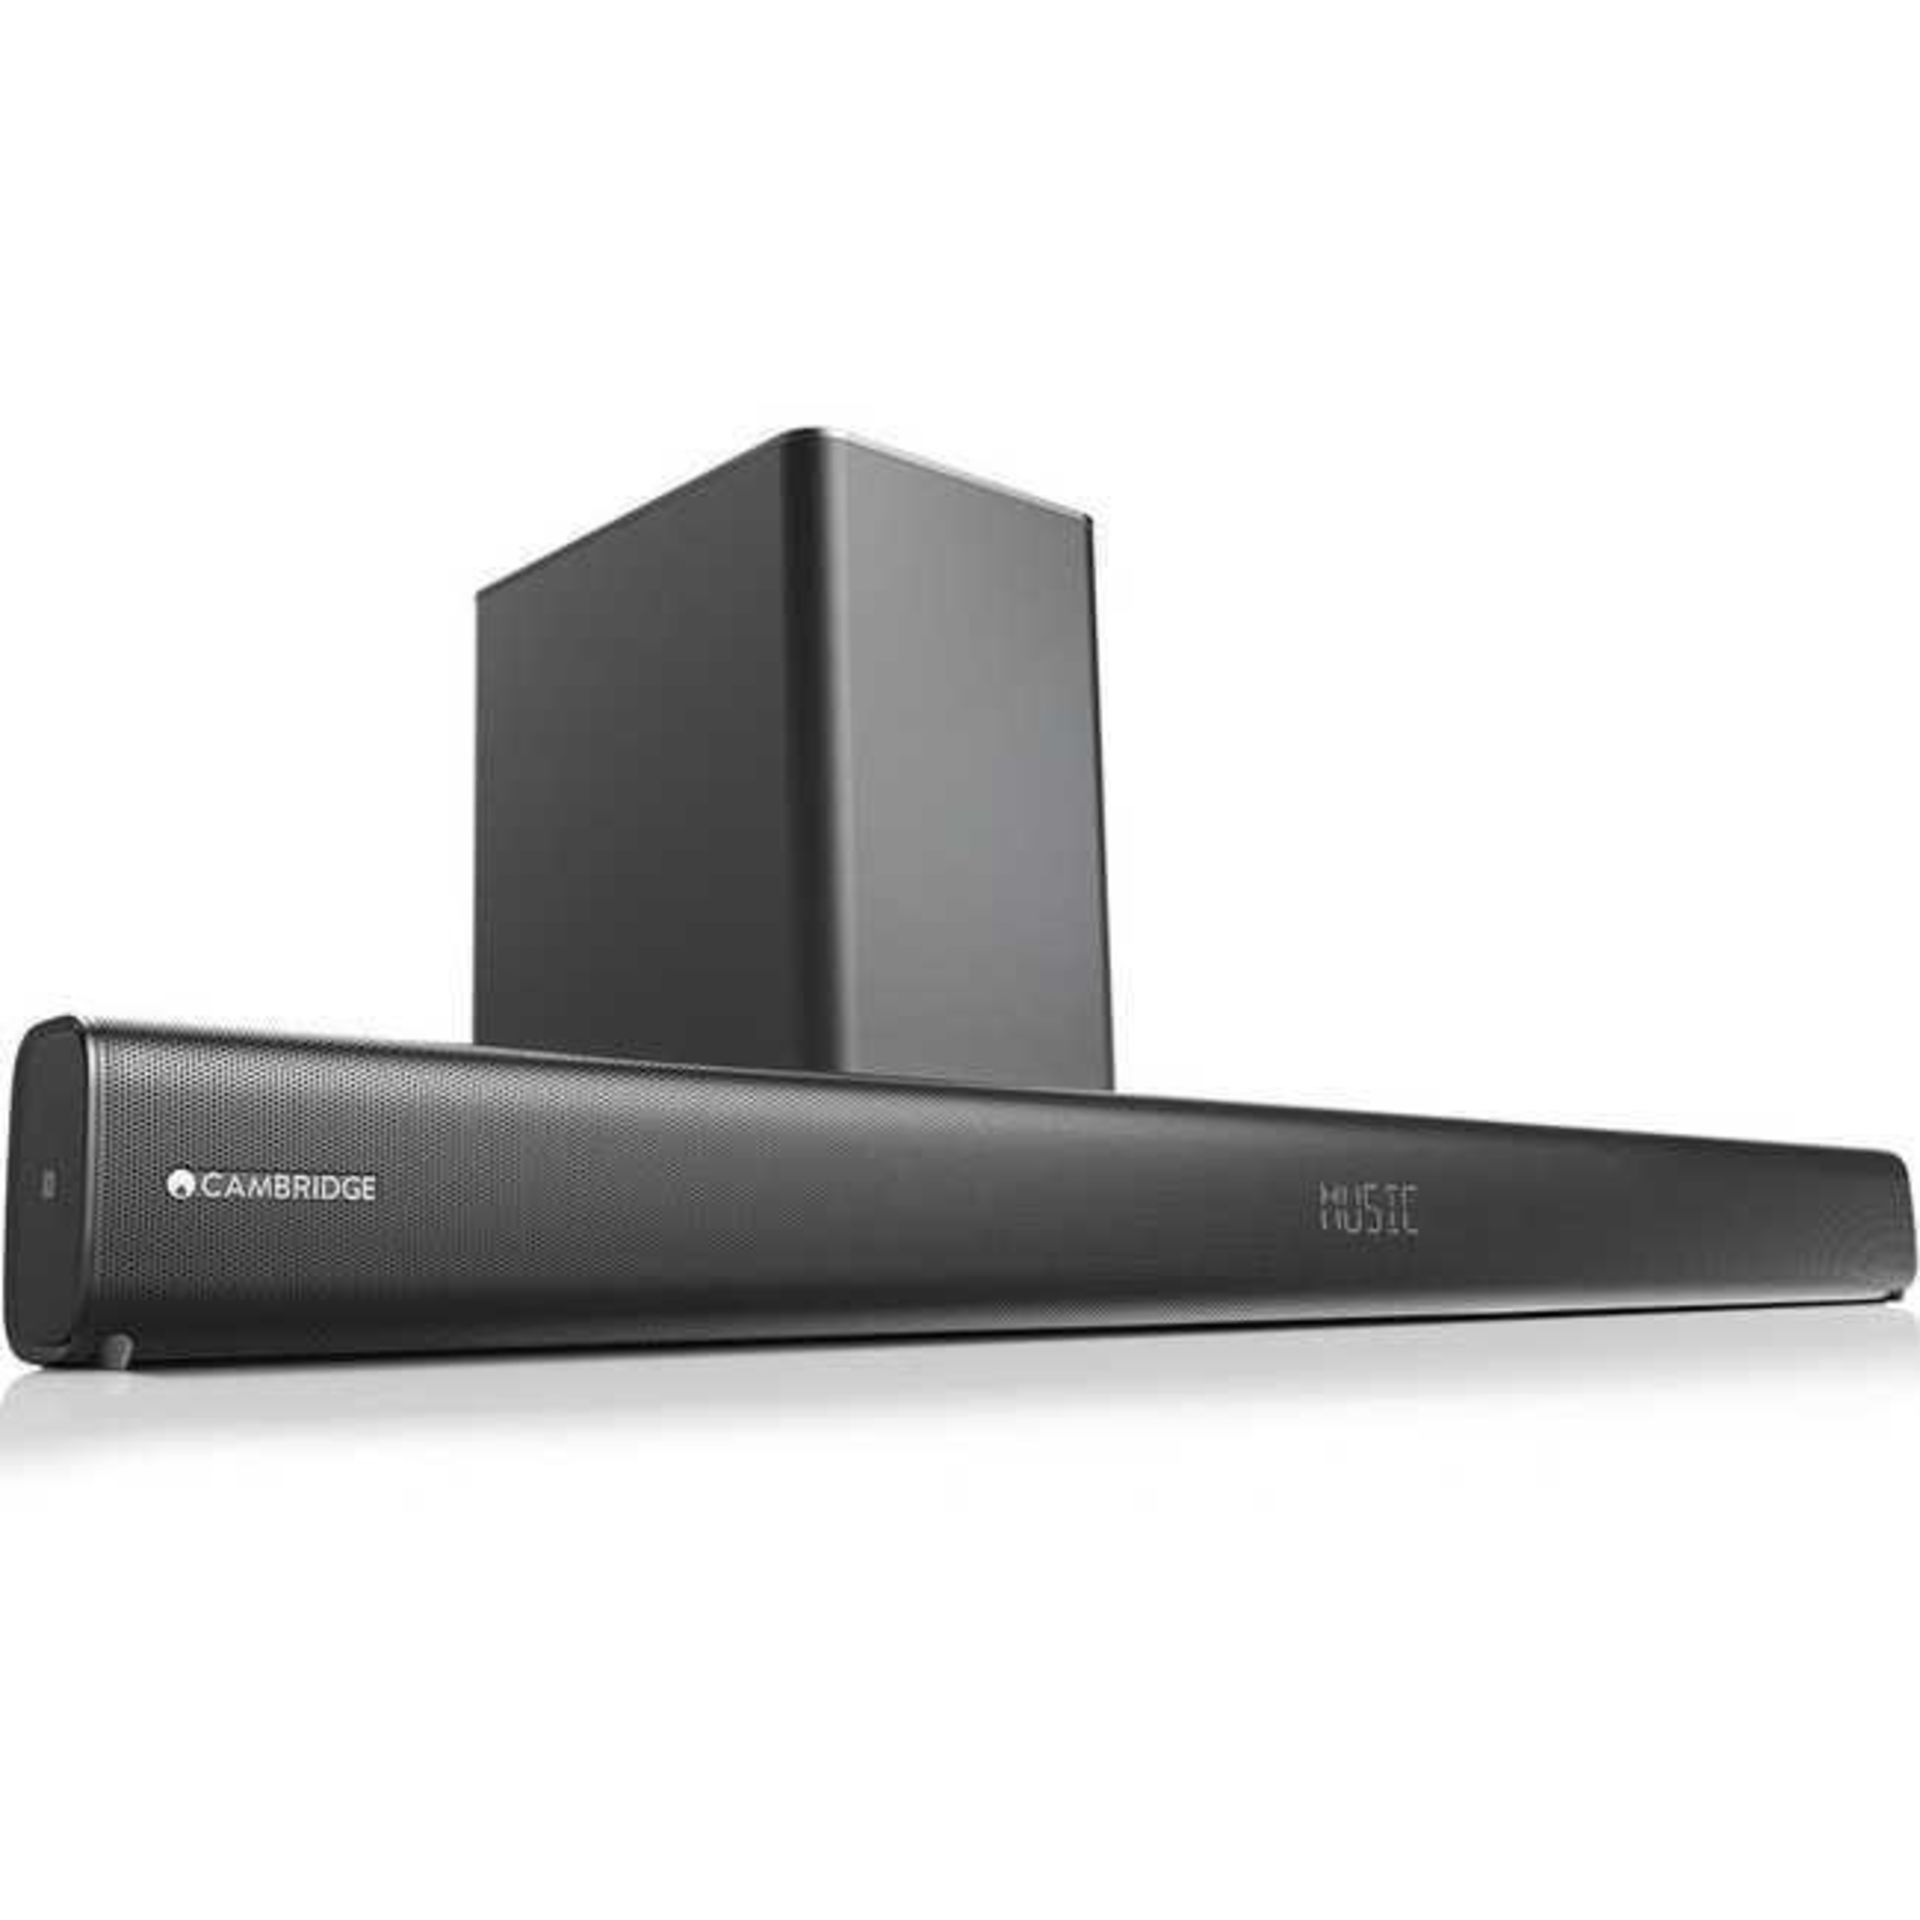 Rrp £500 Boxed Orbitsound A70 Airsound Soundbar And Wireless Subwoofer (Tested) (Working)